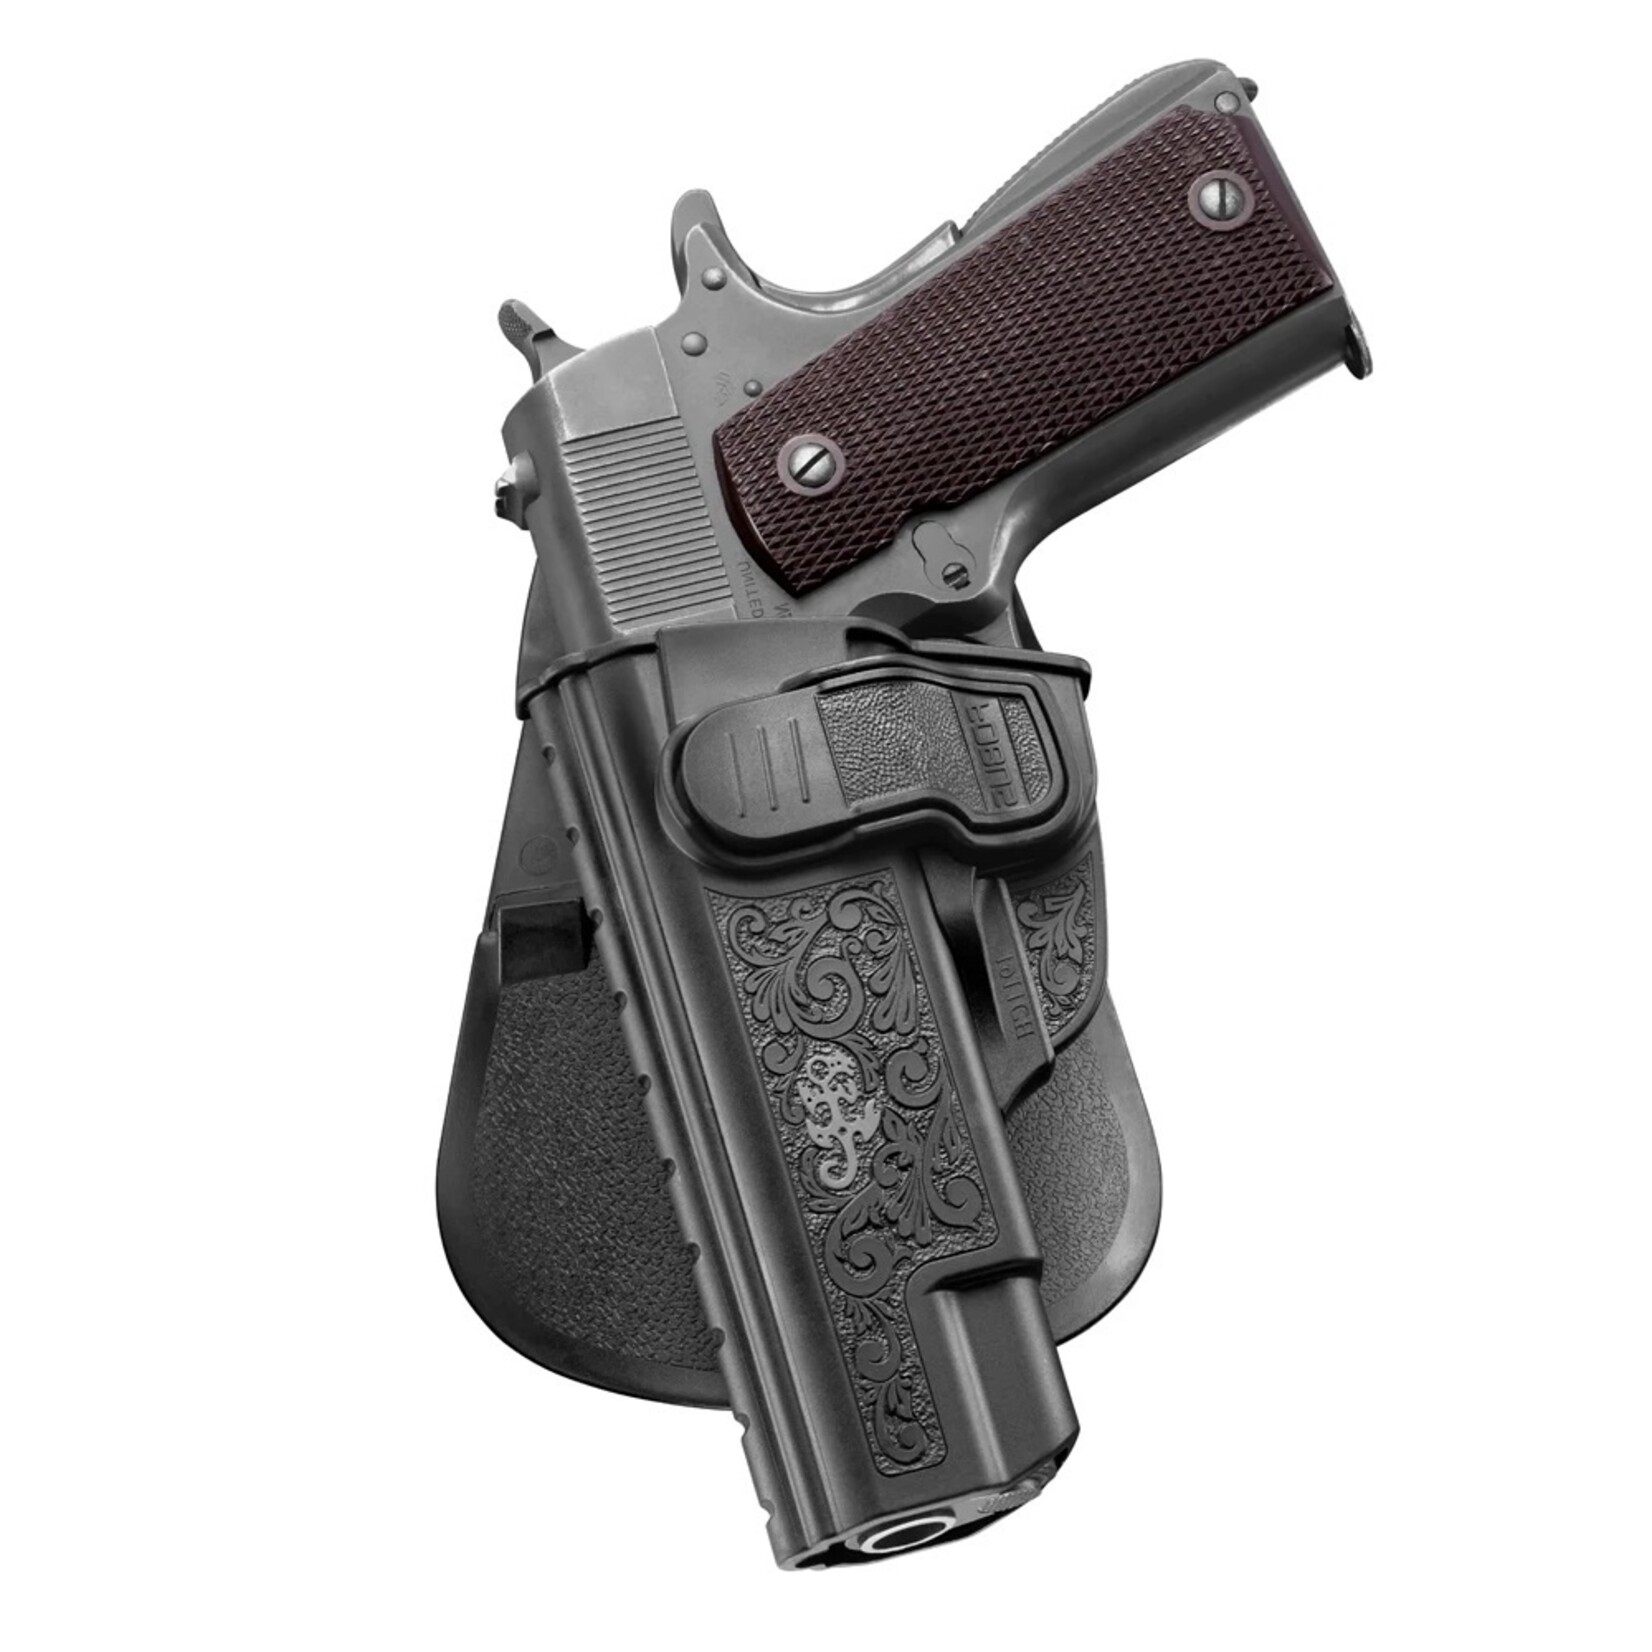 FOBUS HOLSTERS FOBUS 1911 STYLE PADDLE HOLSTER - LEFT HAND